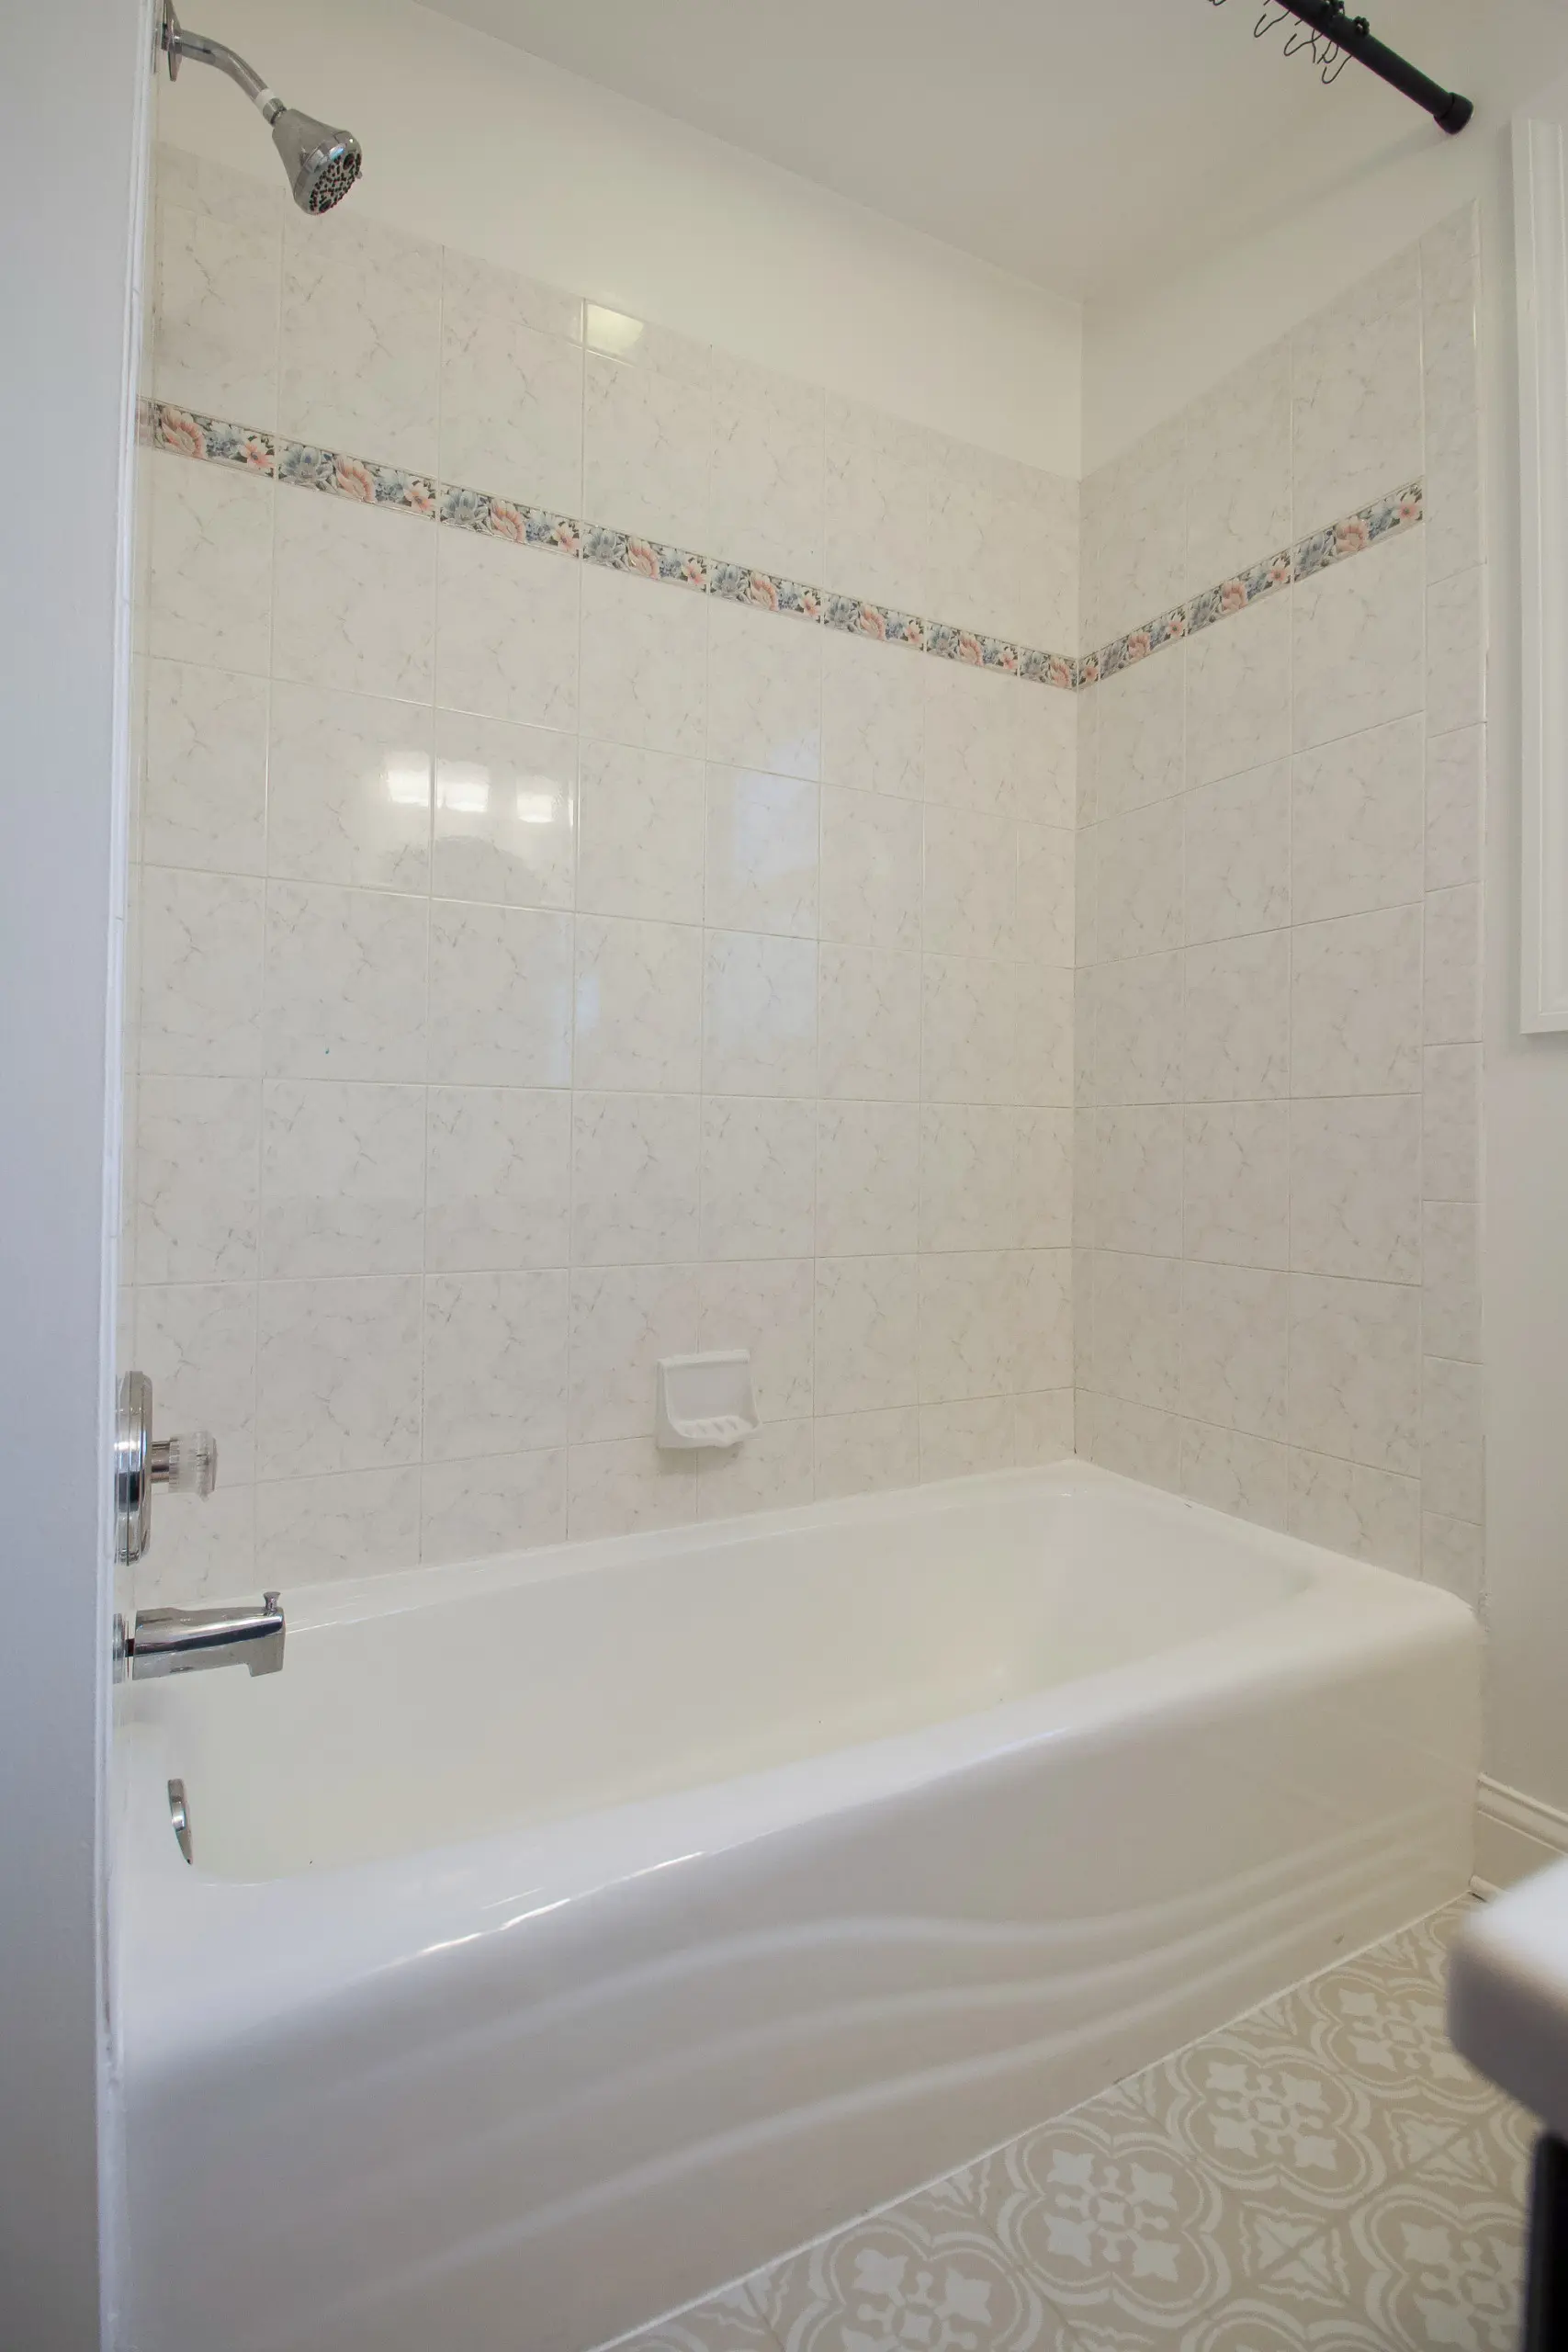 How to Choose and Apply Bathtub Paint for a Beautiful Bathroom Makeover